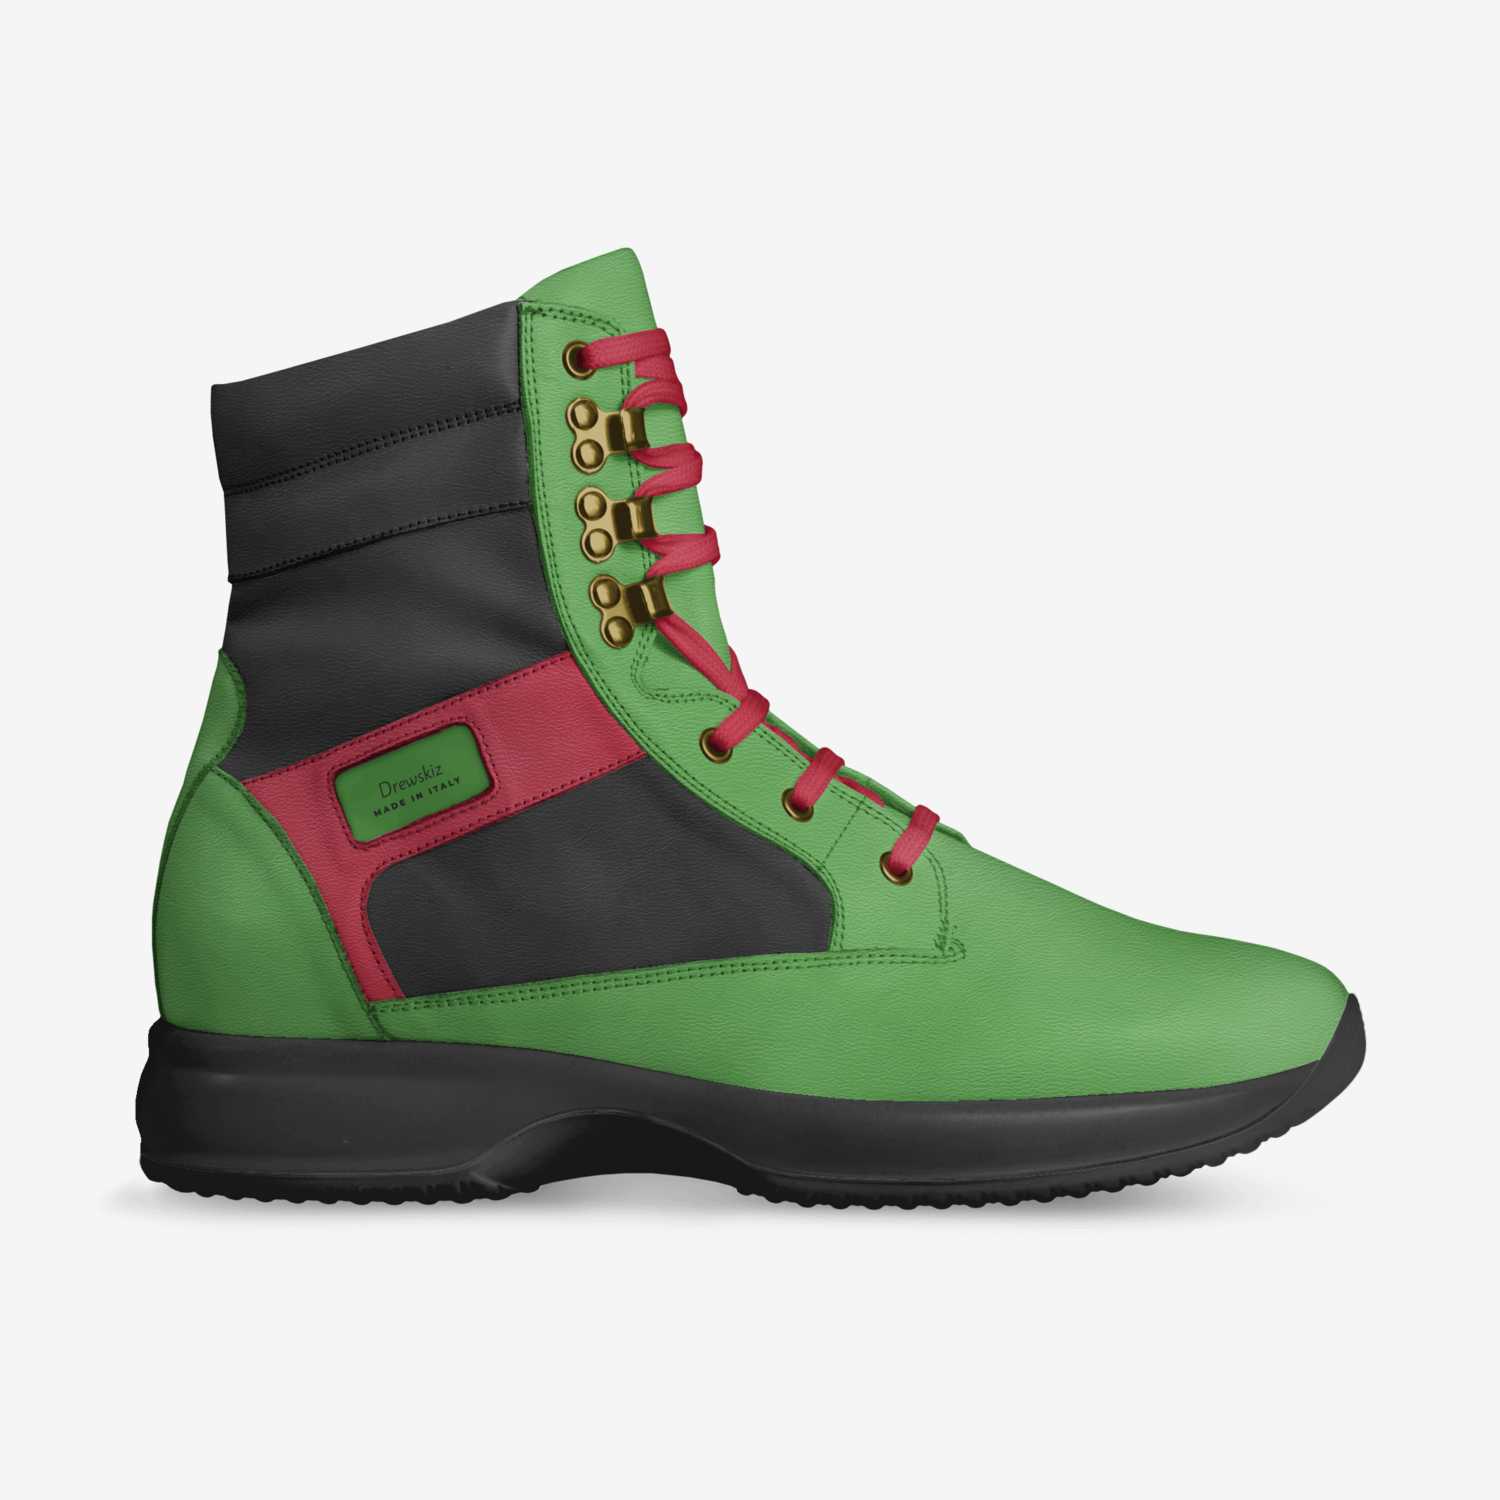 Green Milez RBG custom made in Italy shoes by Andrew Stadeker | Side view